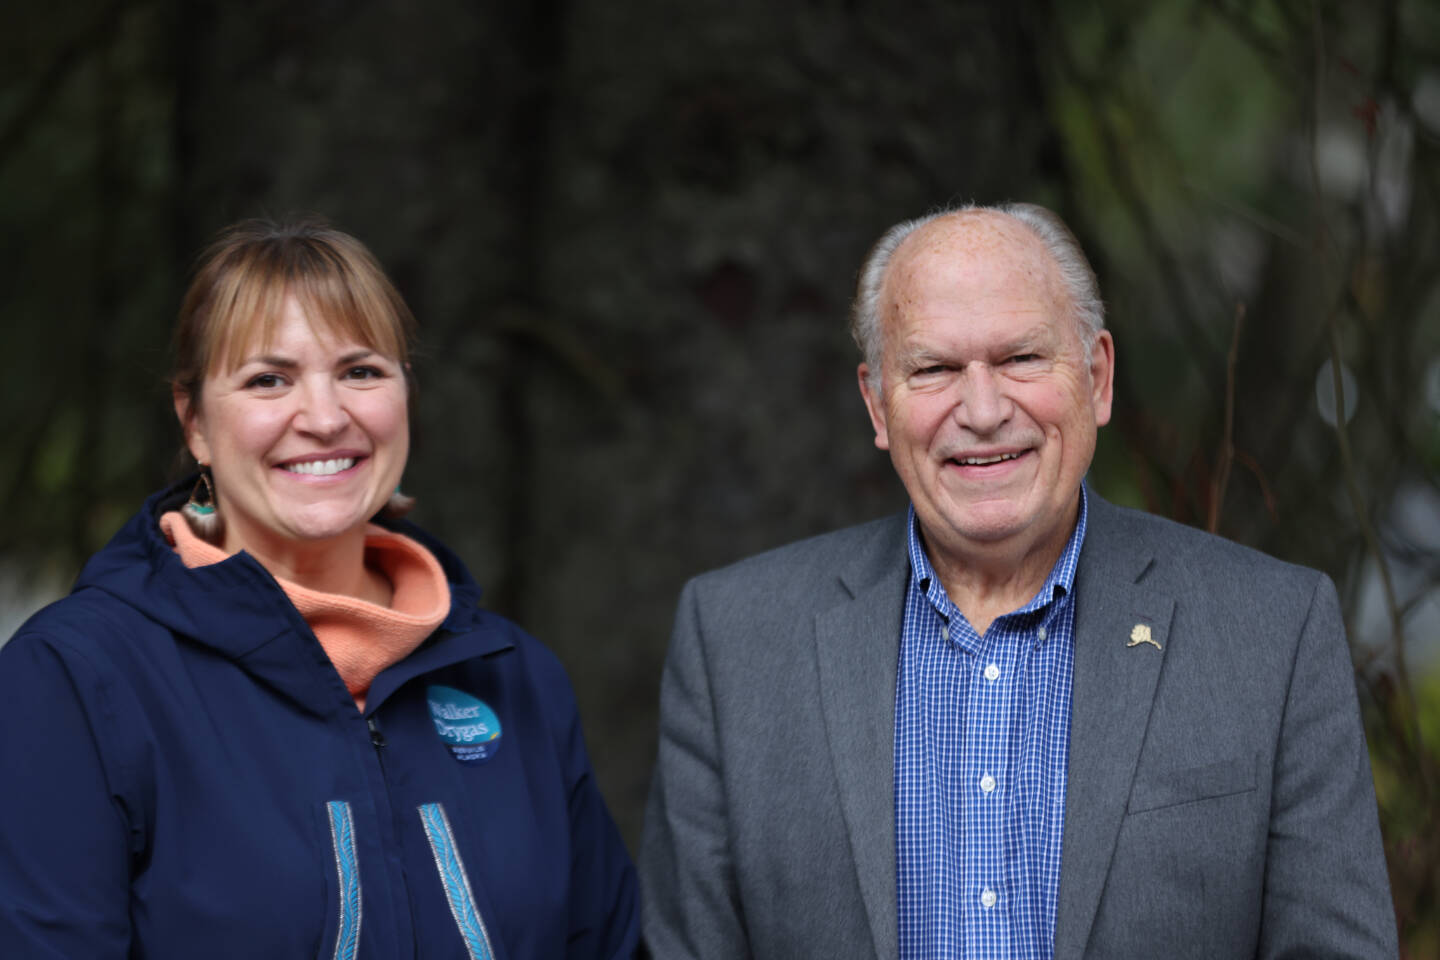 Heidi Drygas, who is running for lieutenant governor, and Bill Walker, who is running for governor, are photographed outside the Juneau Empire’s offices on Oct. 5, 2022, in Juneau, Alaska. Walker said he’s hopeful voters will understand his decision to draw from the Alaska Permanent Fund to fund state government. (Ben Hohenstatt / Juneau Empire)